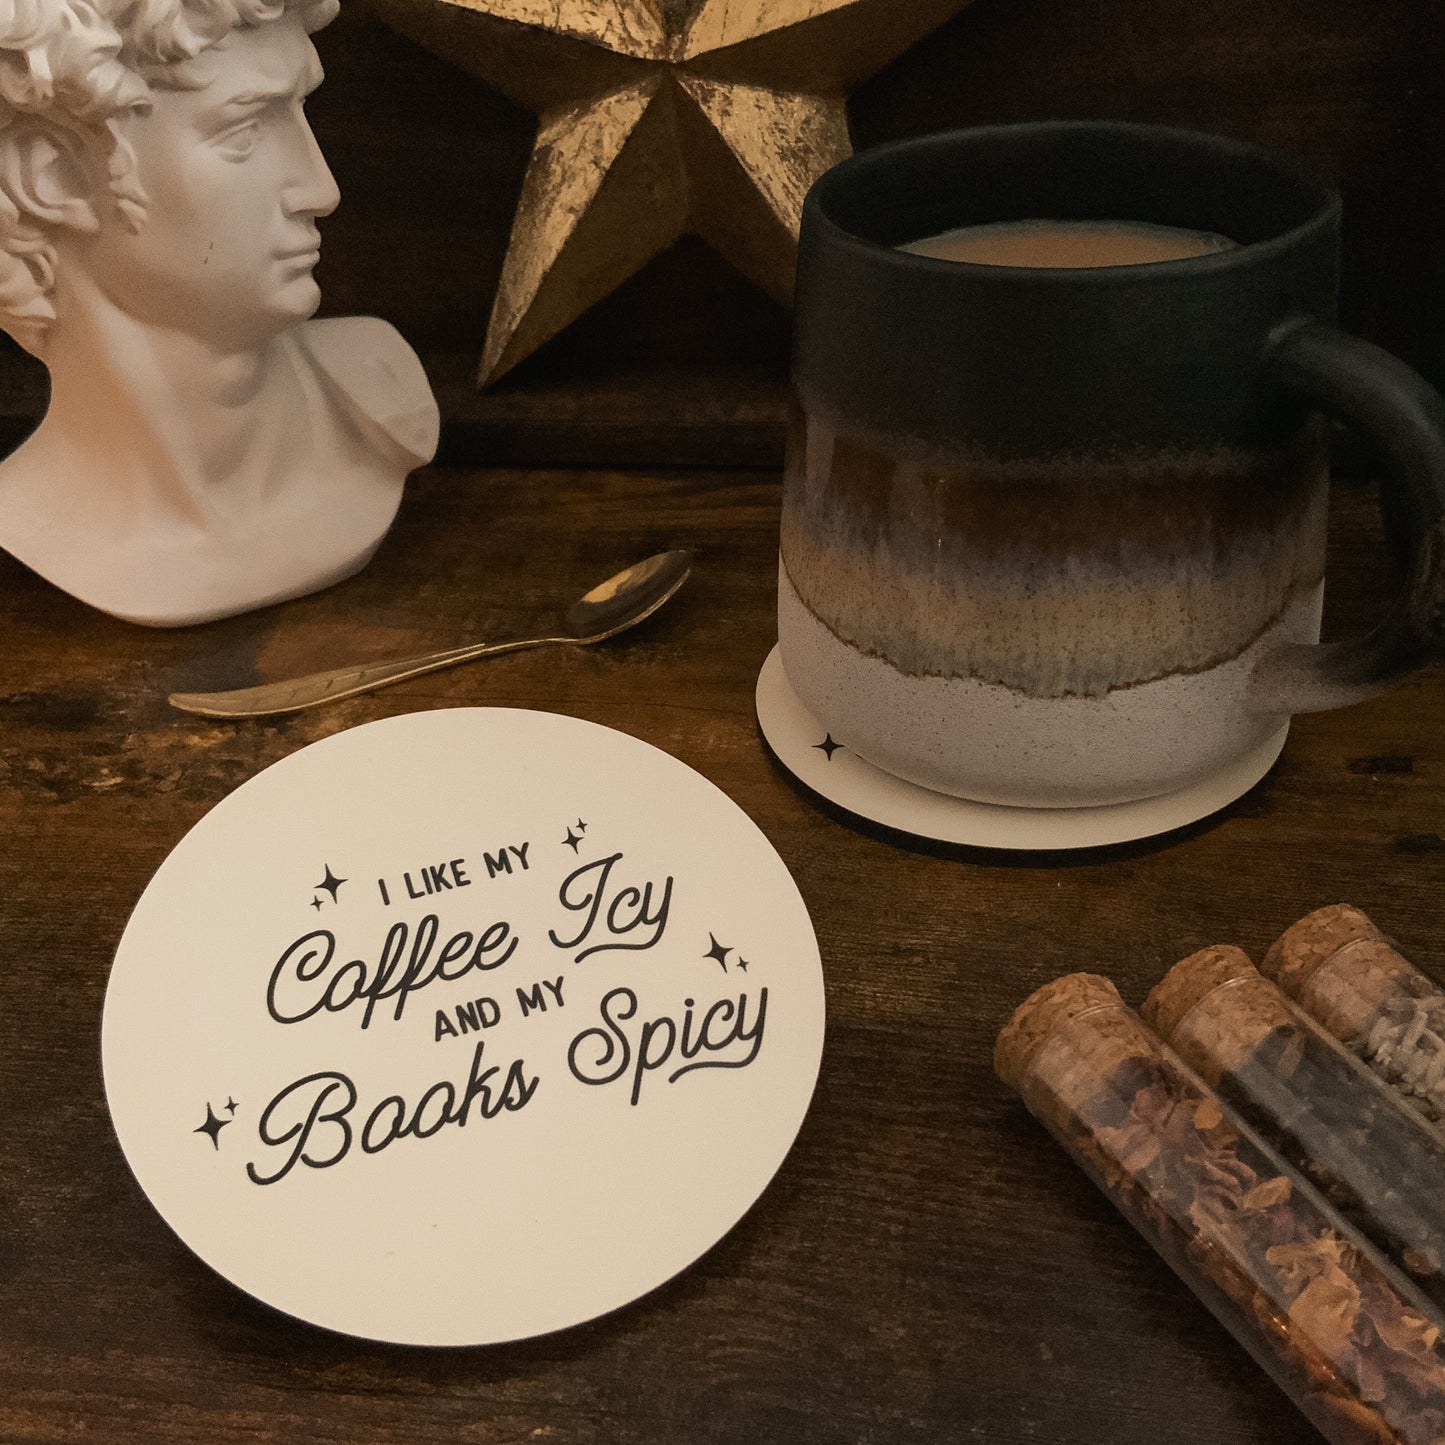 Coffee Icy, Books Spicy Coaster